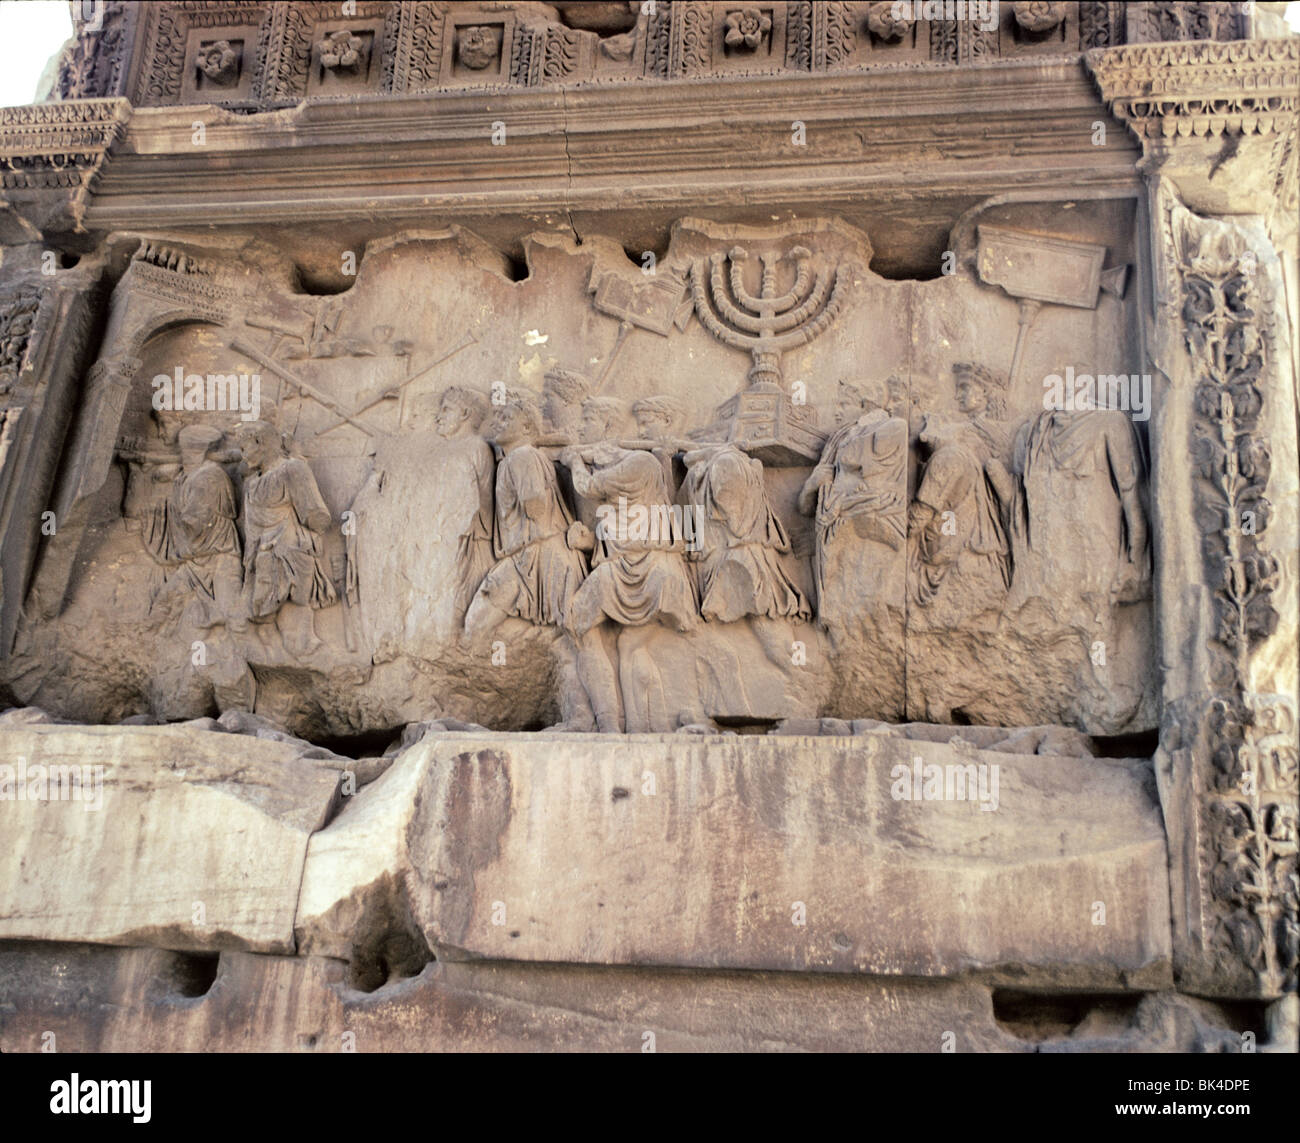 Rome Italy - Sculpture on the Arch of Titus depicting sacking of Jerusalem in year 70 AD by Romans during First Jewish-Roman War Stock Photo